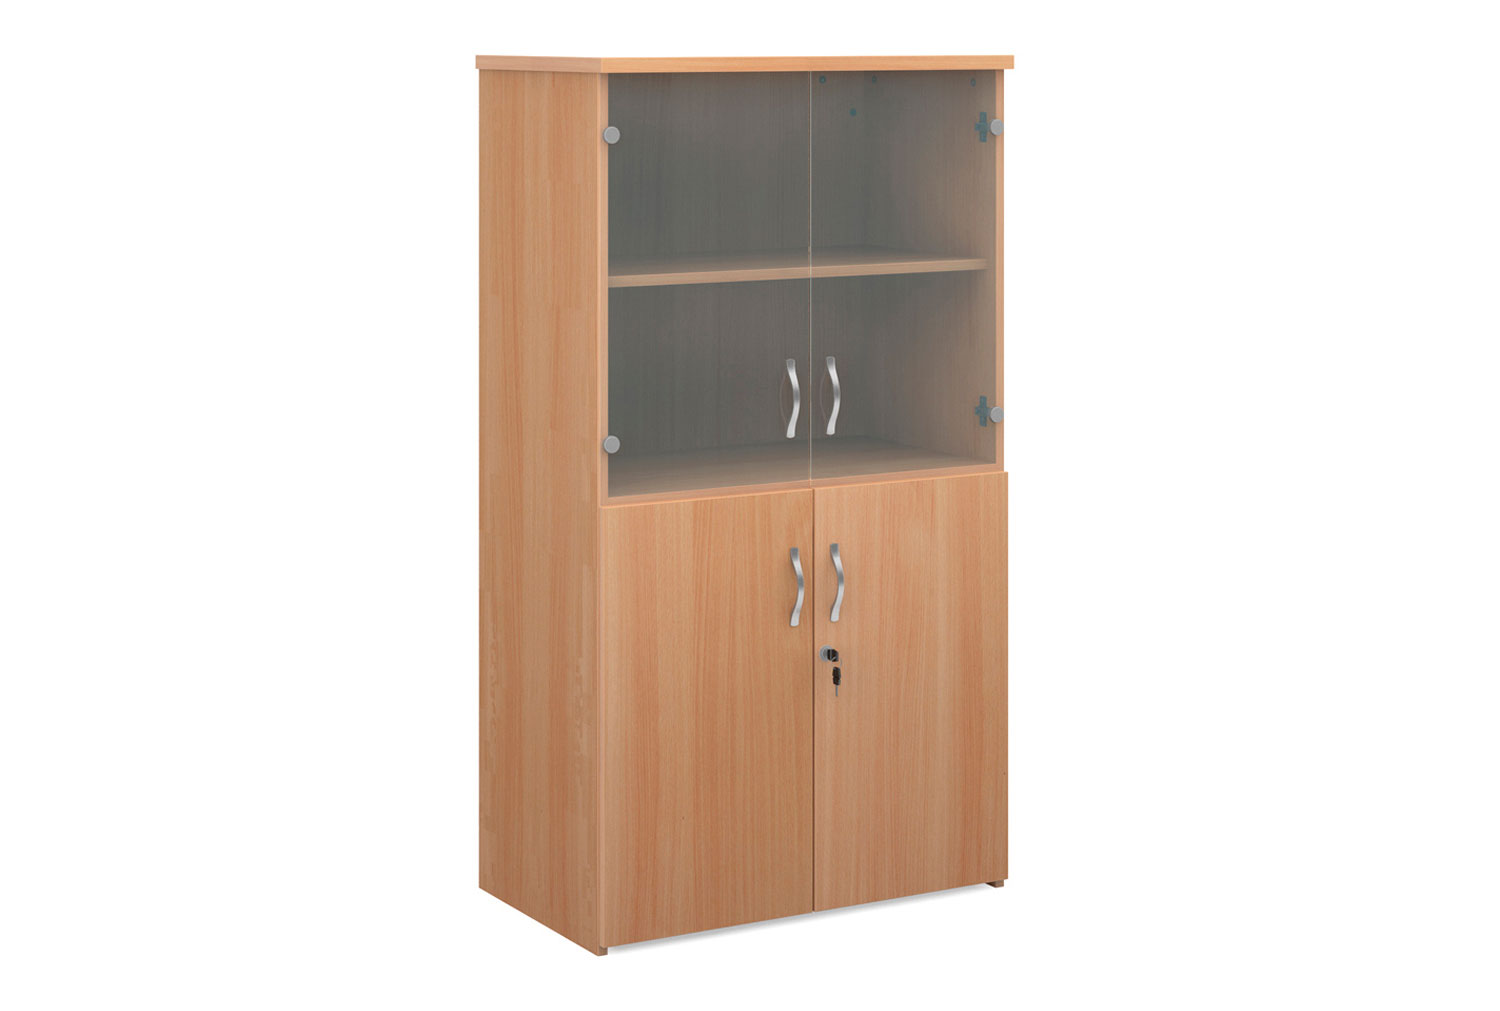 Alcott Home Office Combination Cupboard, 3 Shelf - 80wx47dx144h (cm), Beech, Express Delivery